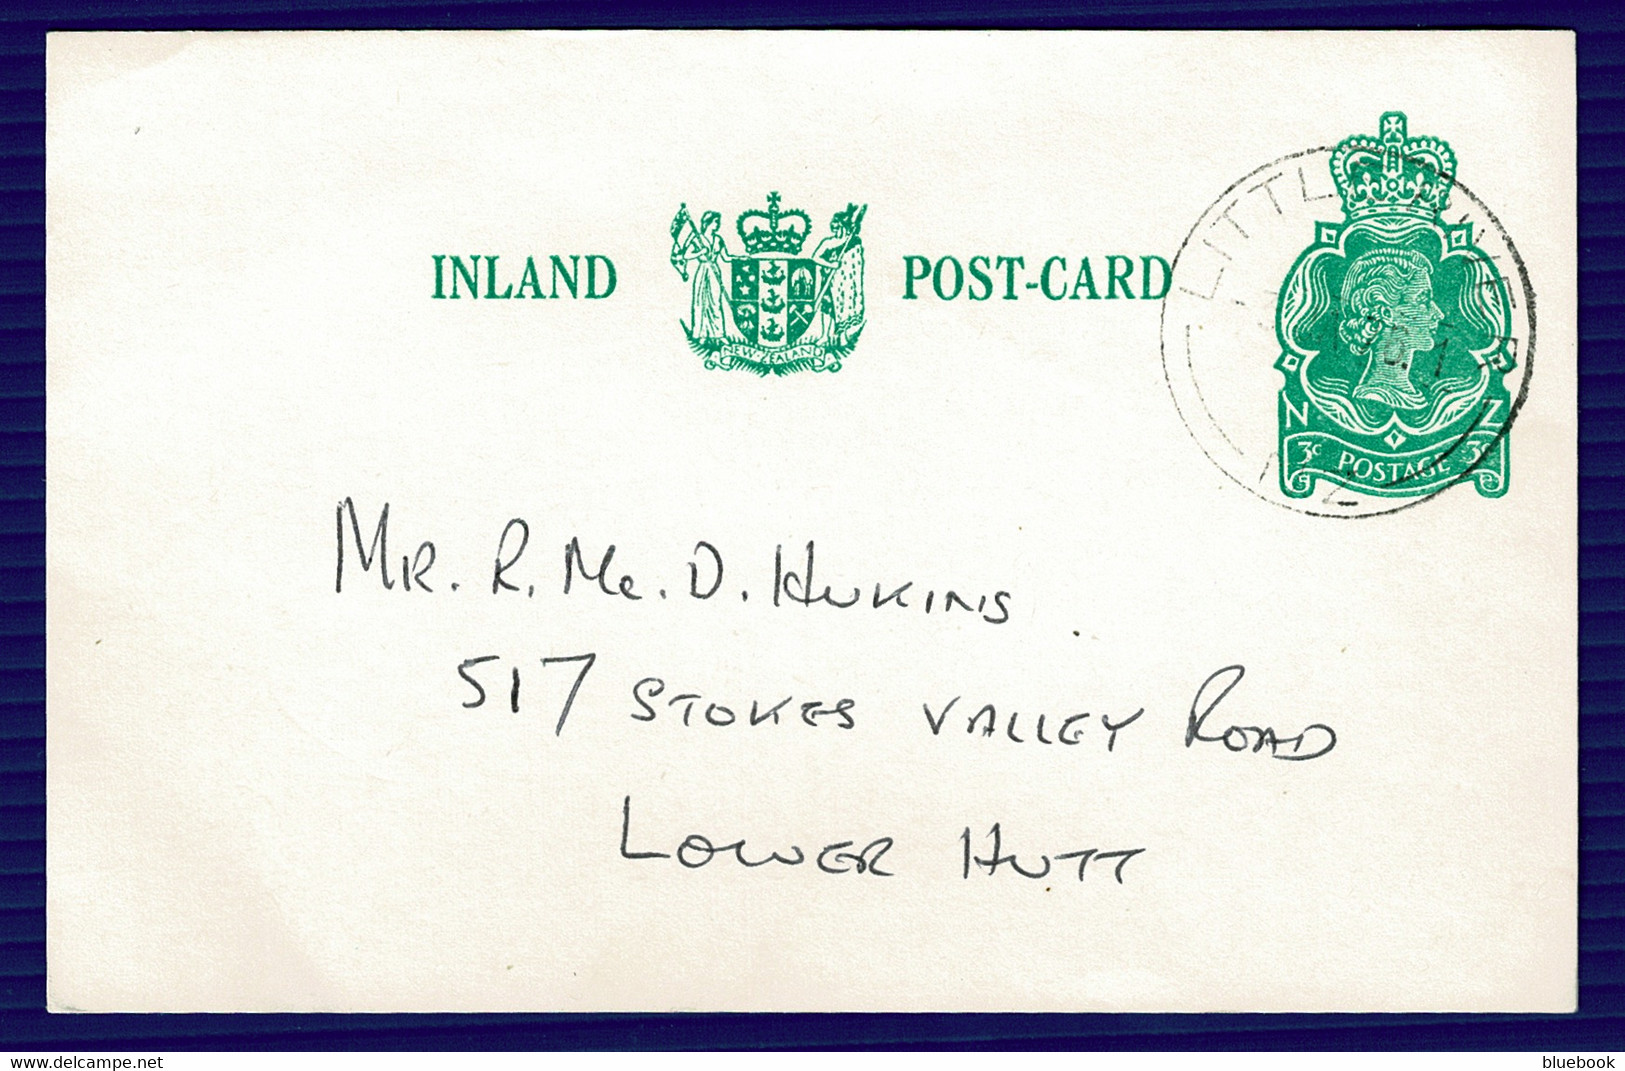 Ref 1566 - 1975 New Zealand 3c Postal Stationery Card - Little River Postmark To Lower Hutt - Covers & Documents